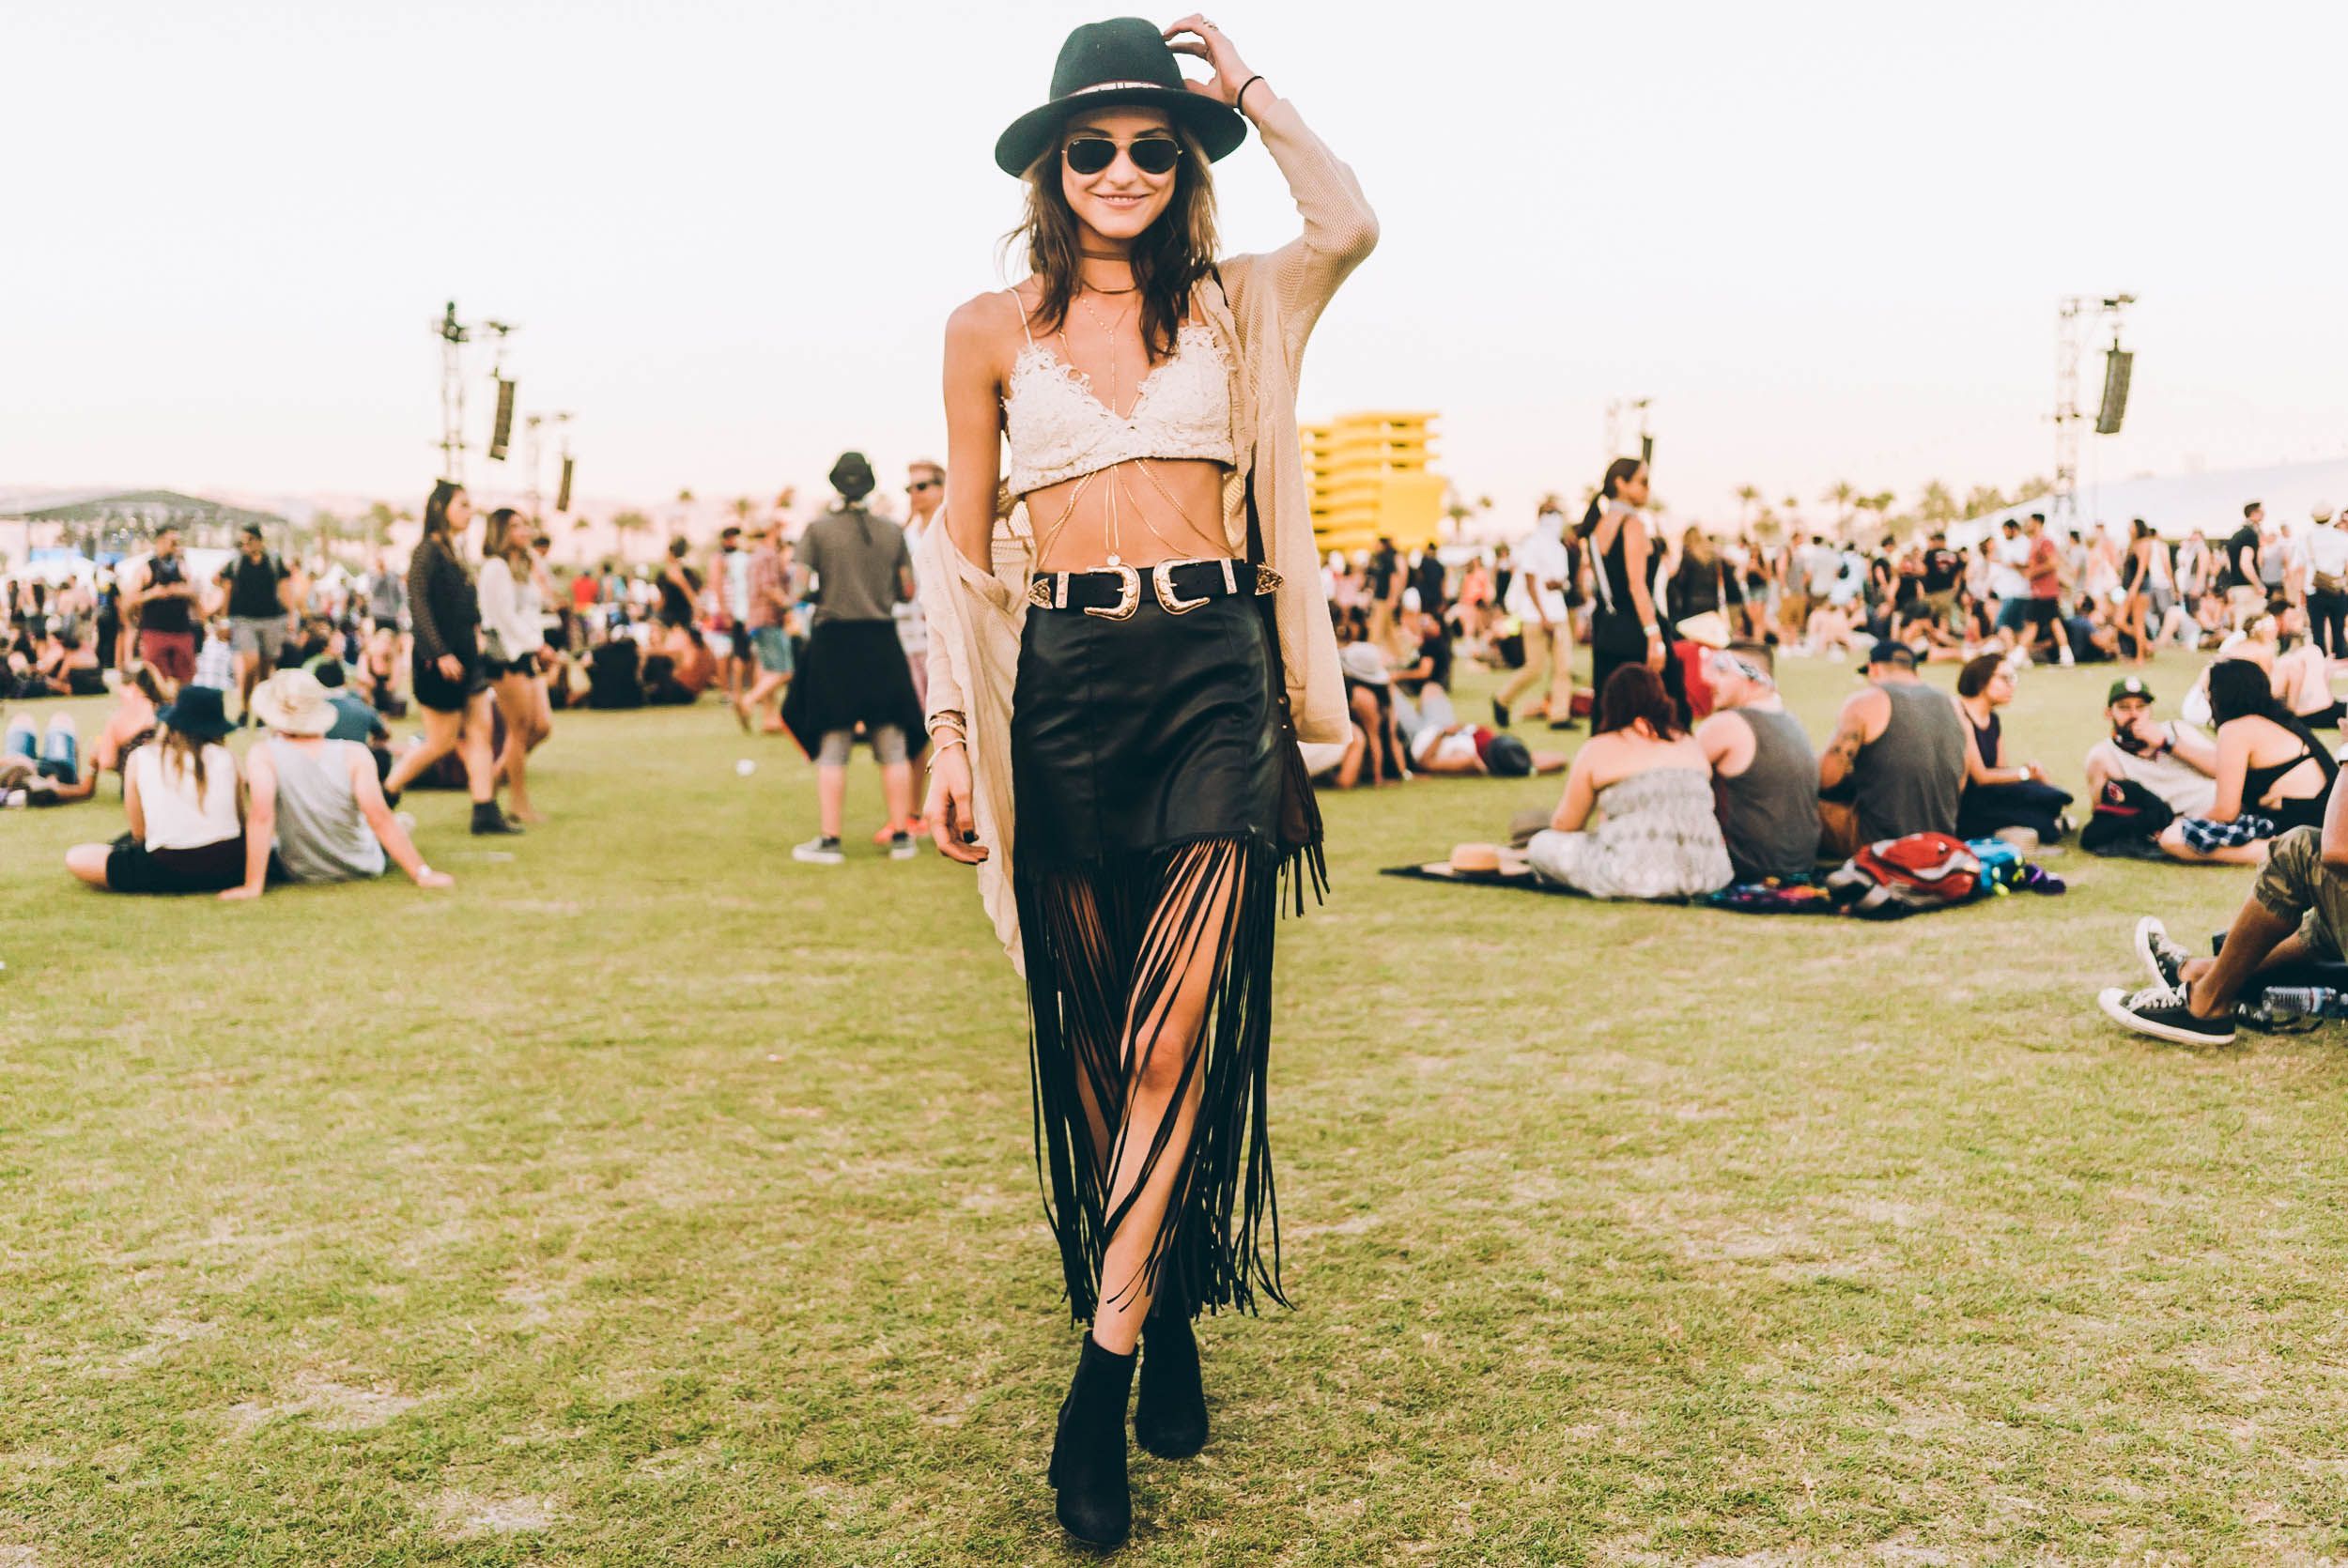 Coachella 2016: Our top 10 favourite festival looks this year